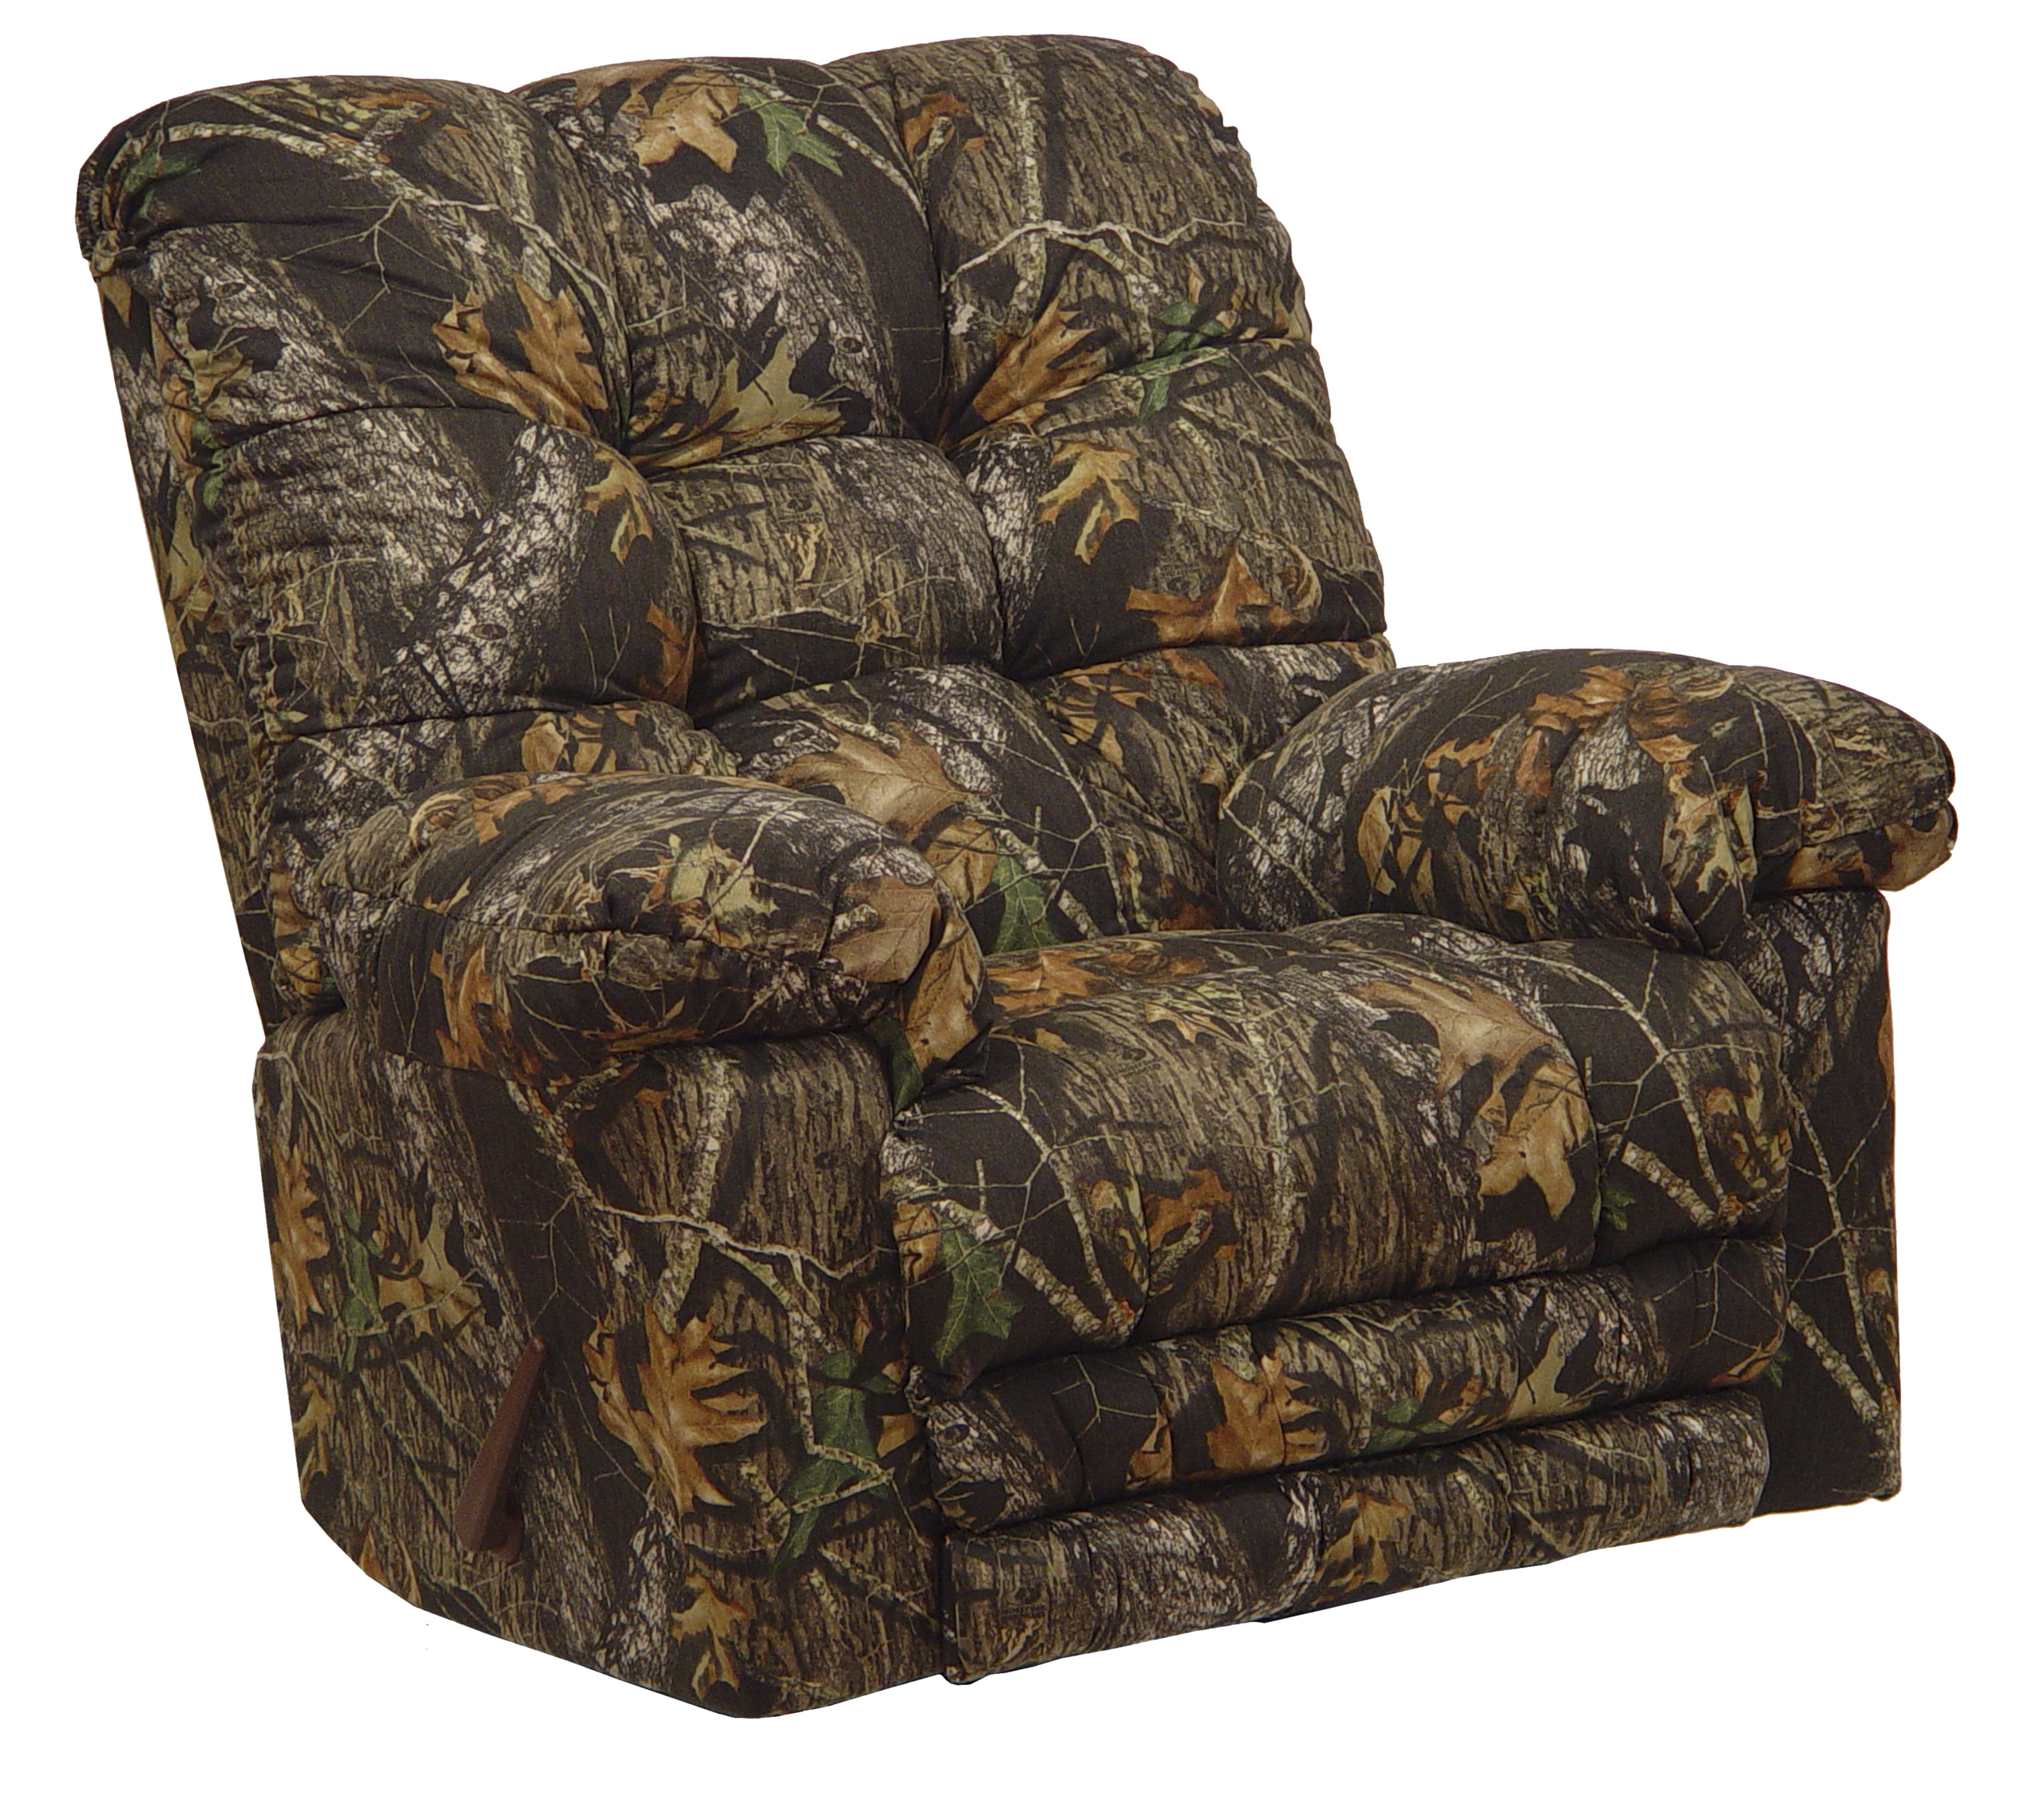 CATNAPPER 46892265536 Magnum Chaise Rocker Recliner with Heat and Massage, Big Man, camouflage